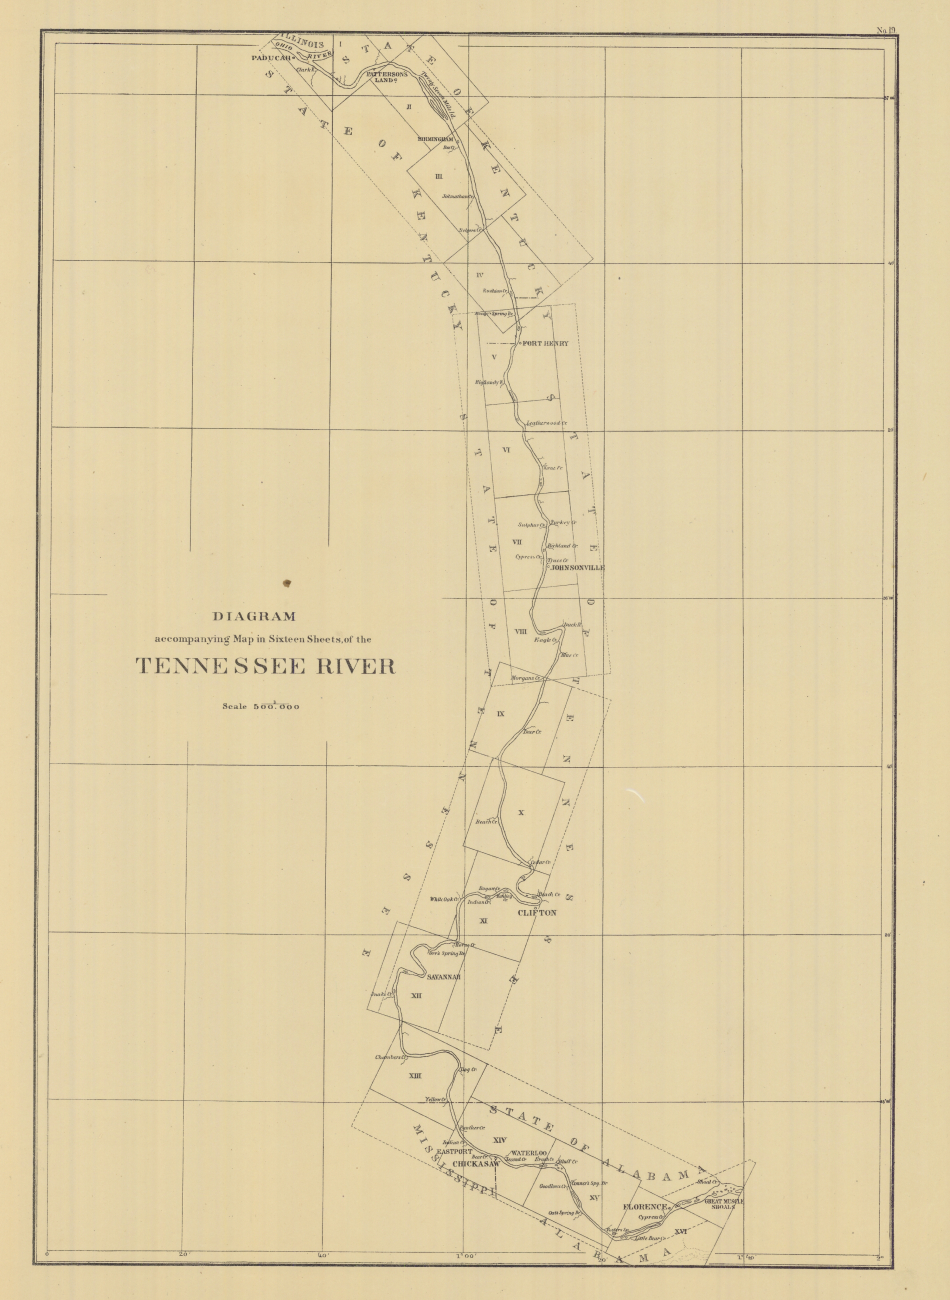 Index map to sheets of Tennessee River reconnaissance